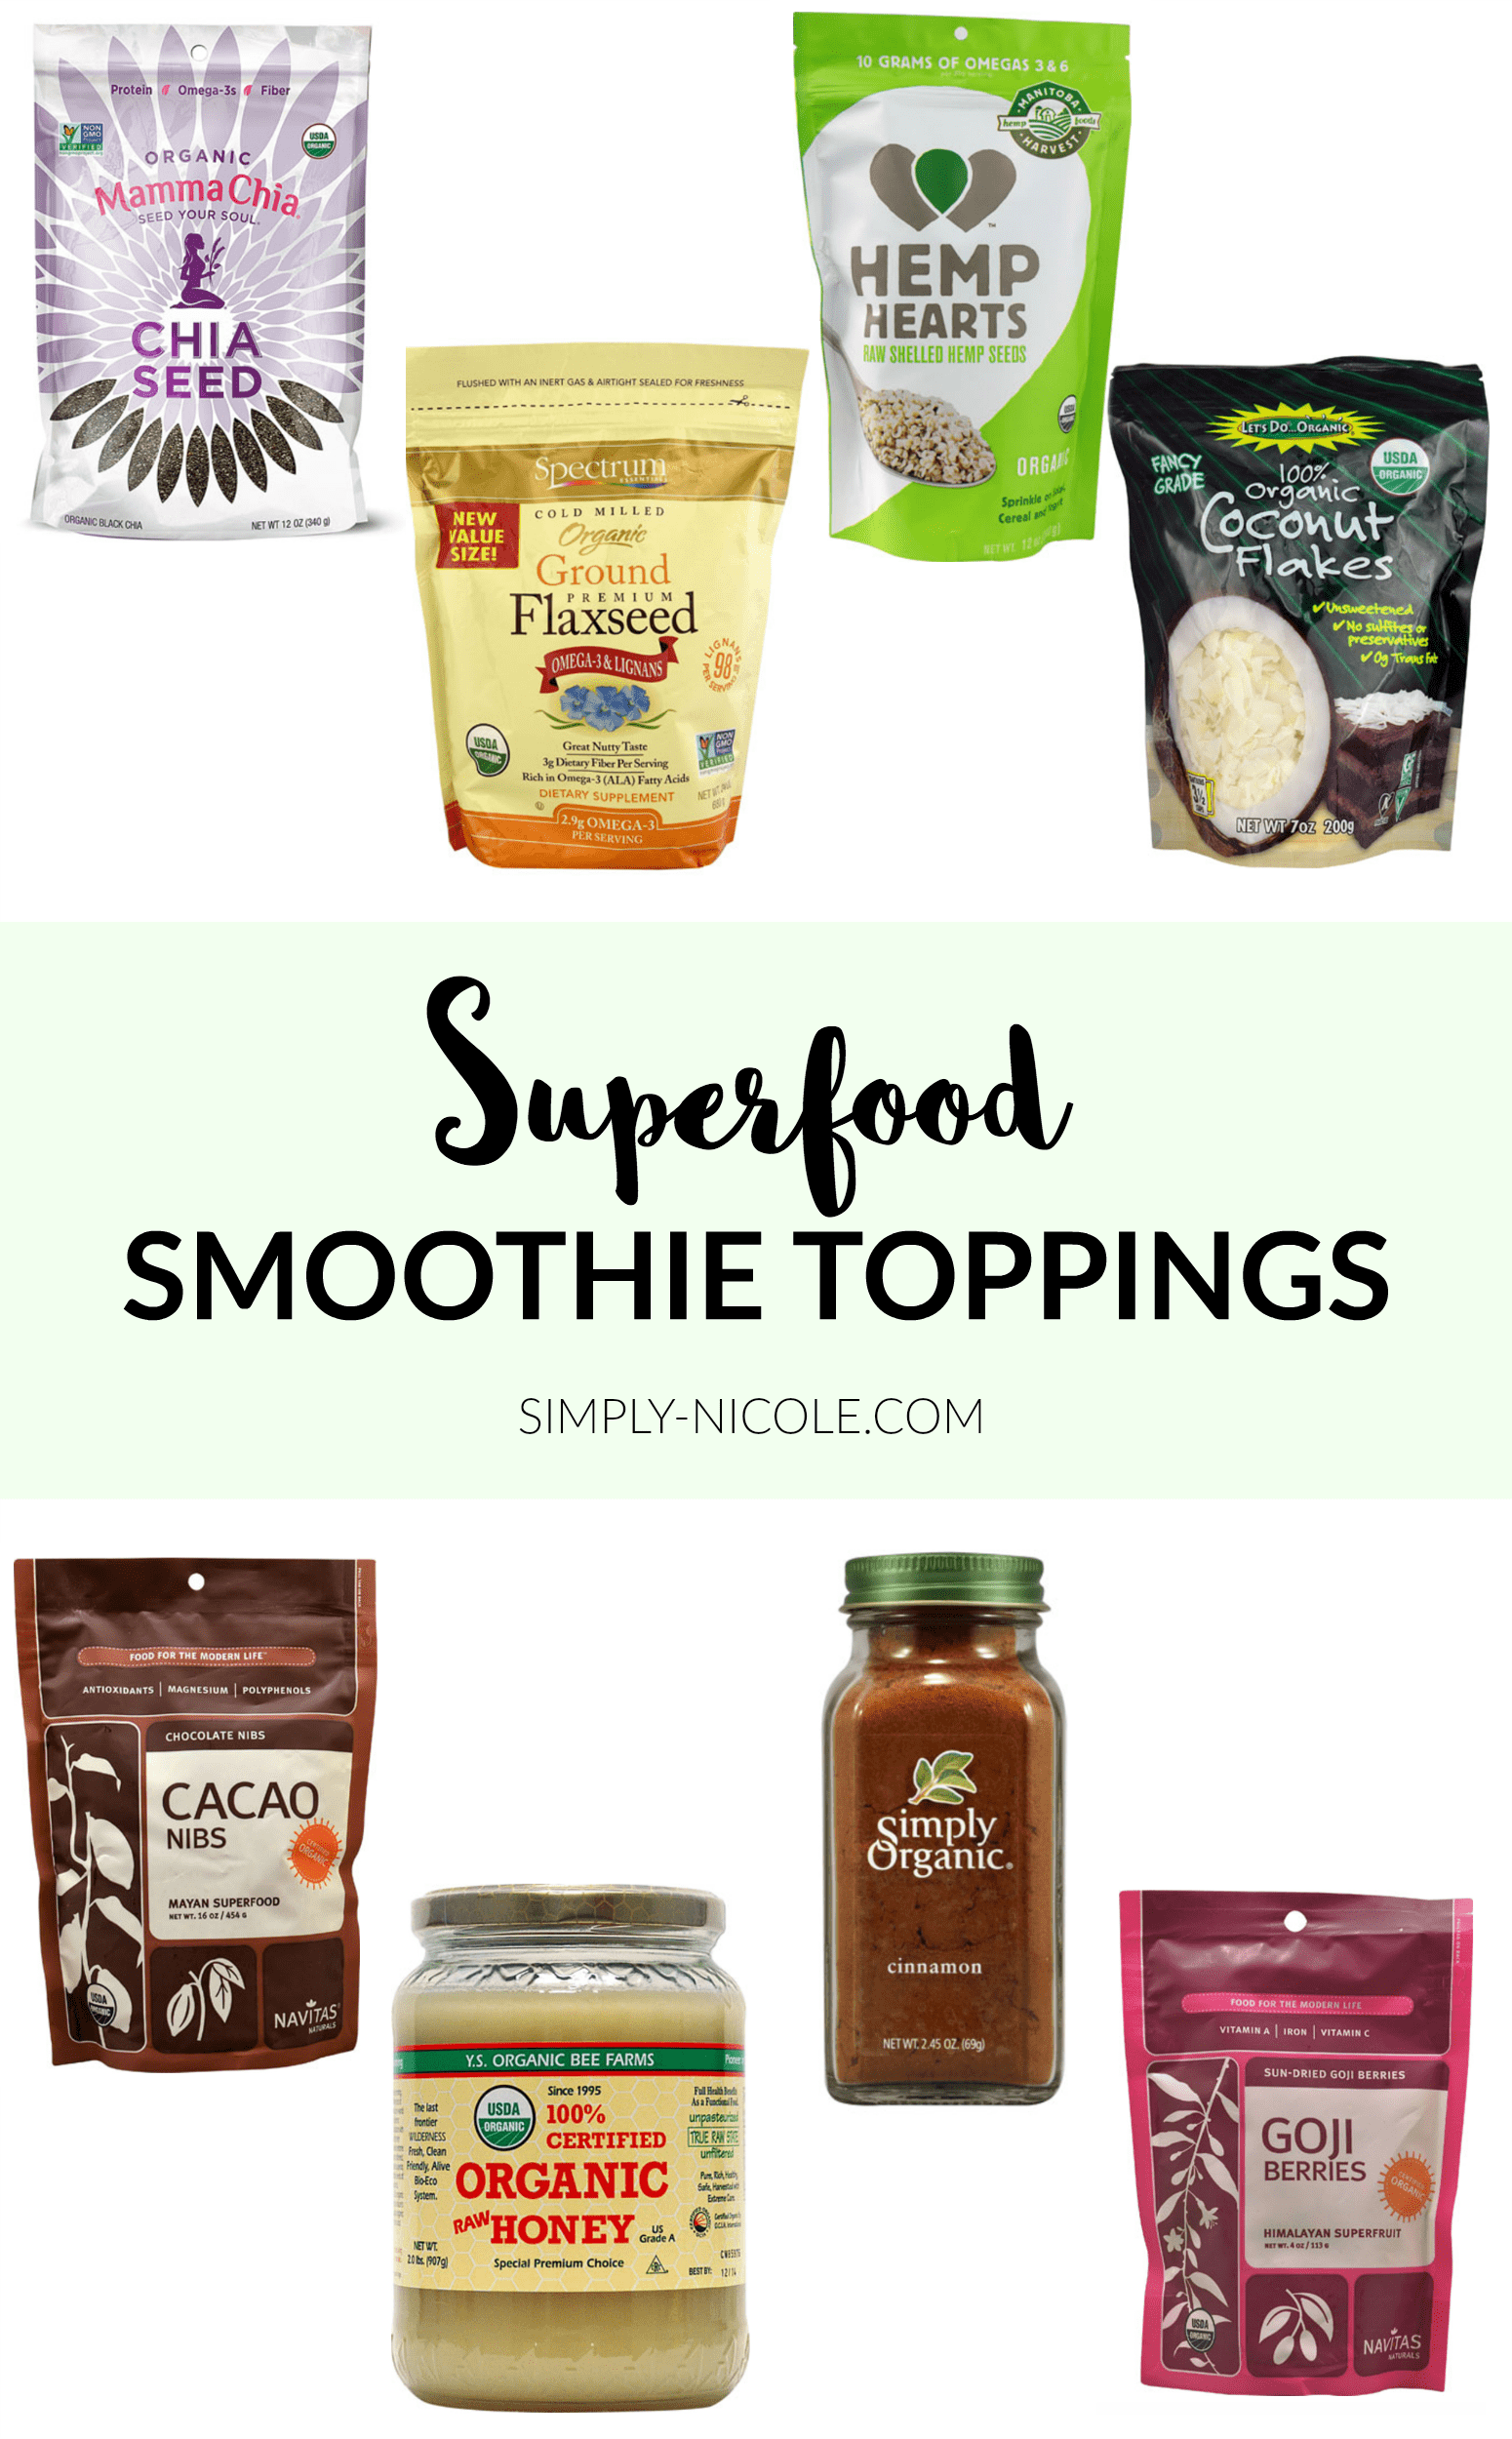 Superfood Smoothie Toppings via Simply-Nicole.com